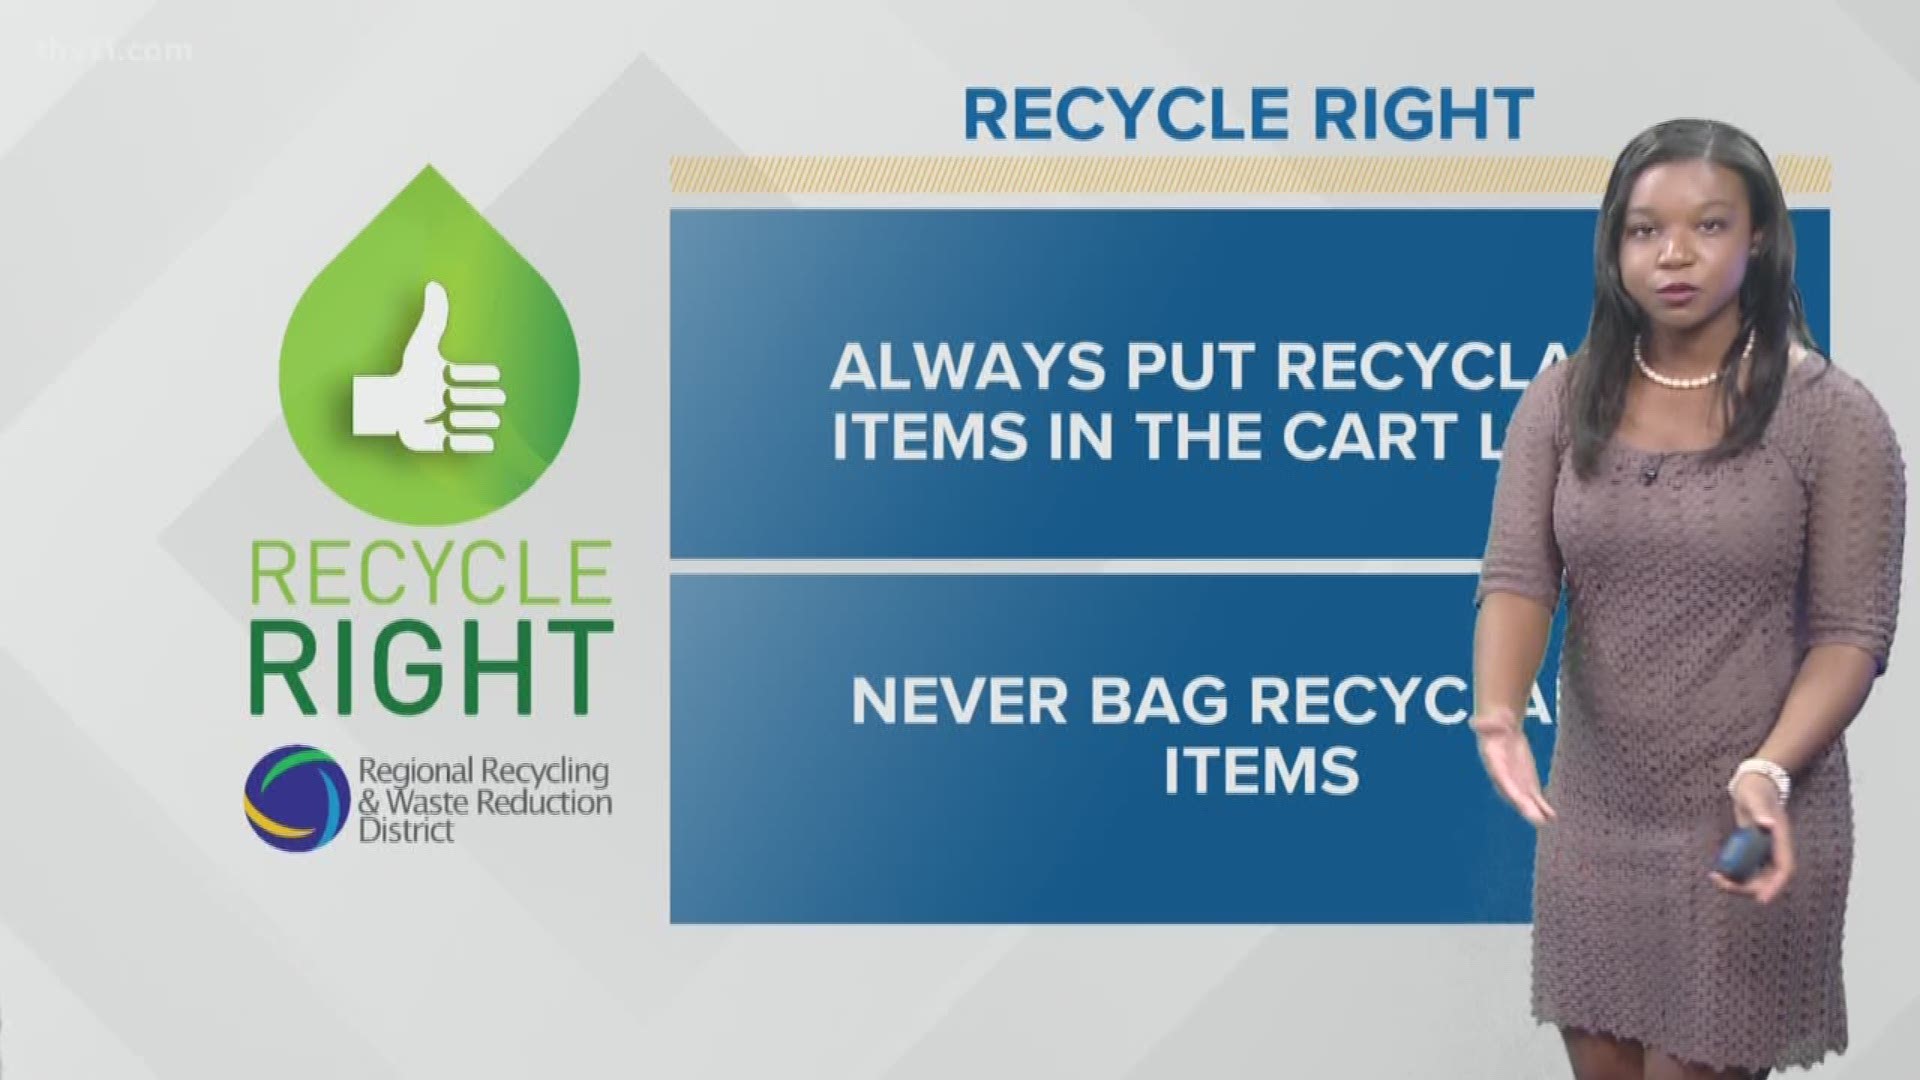 Raven Richard has your Recycle Right tip for week 33.